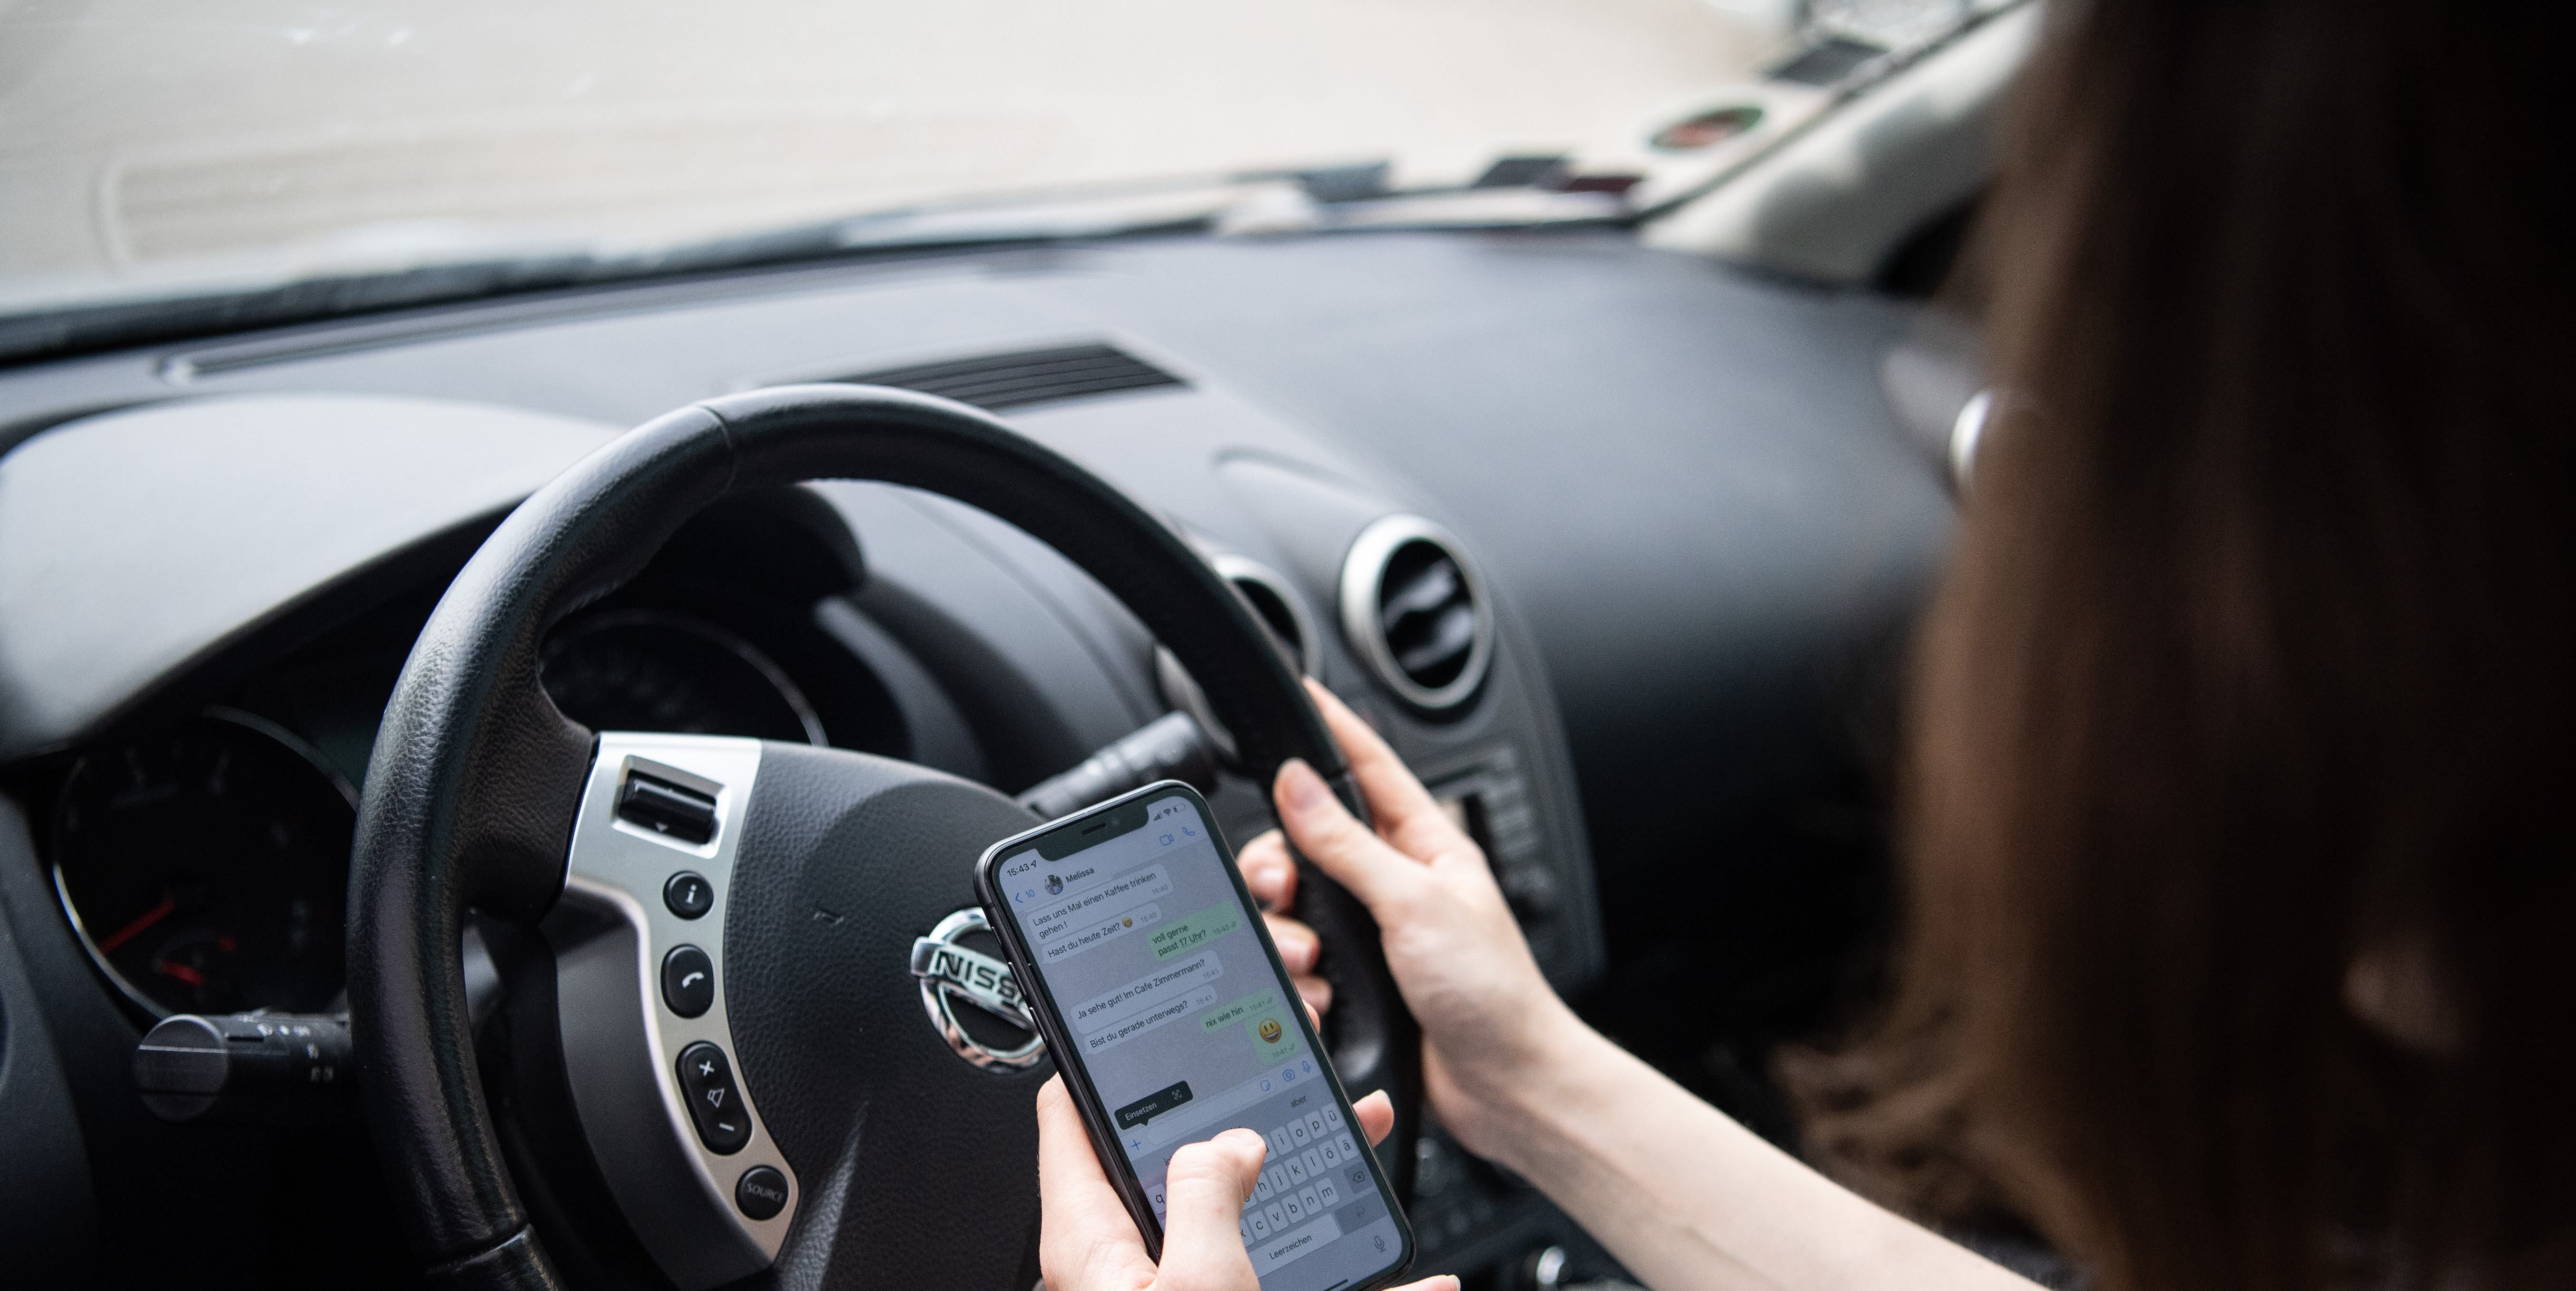 Distracted Driving Can Be Fatal—Let's Fix This